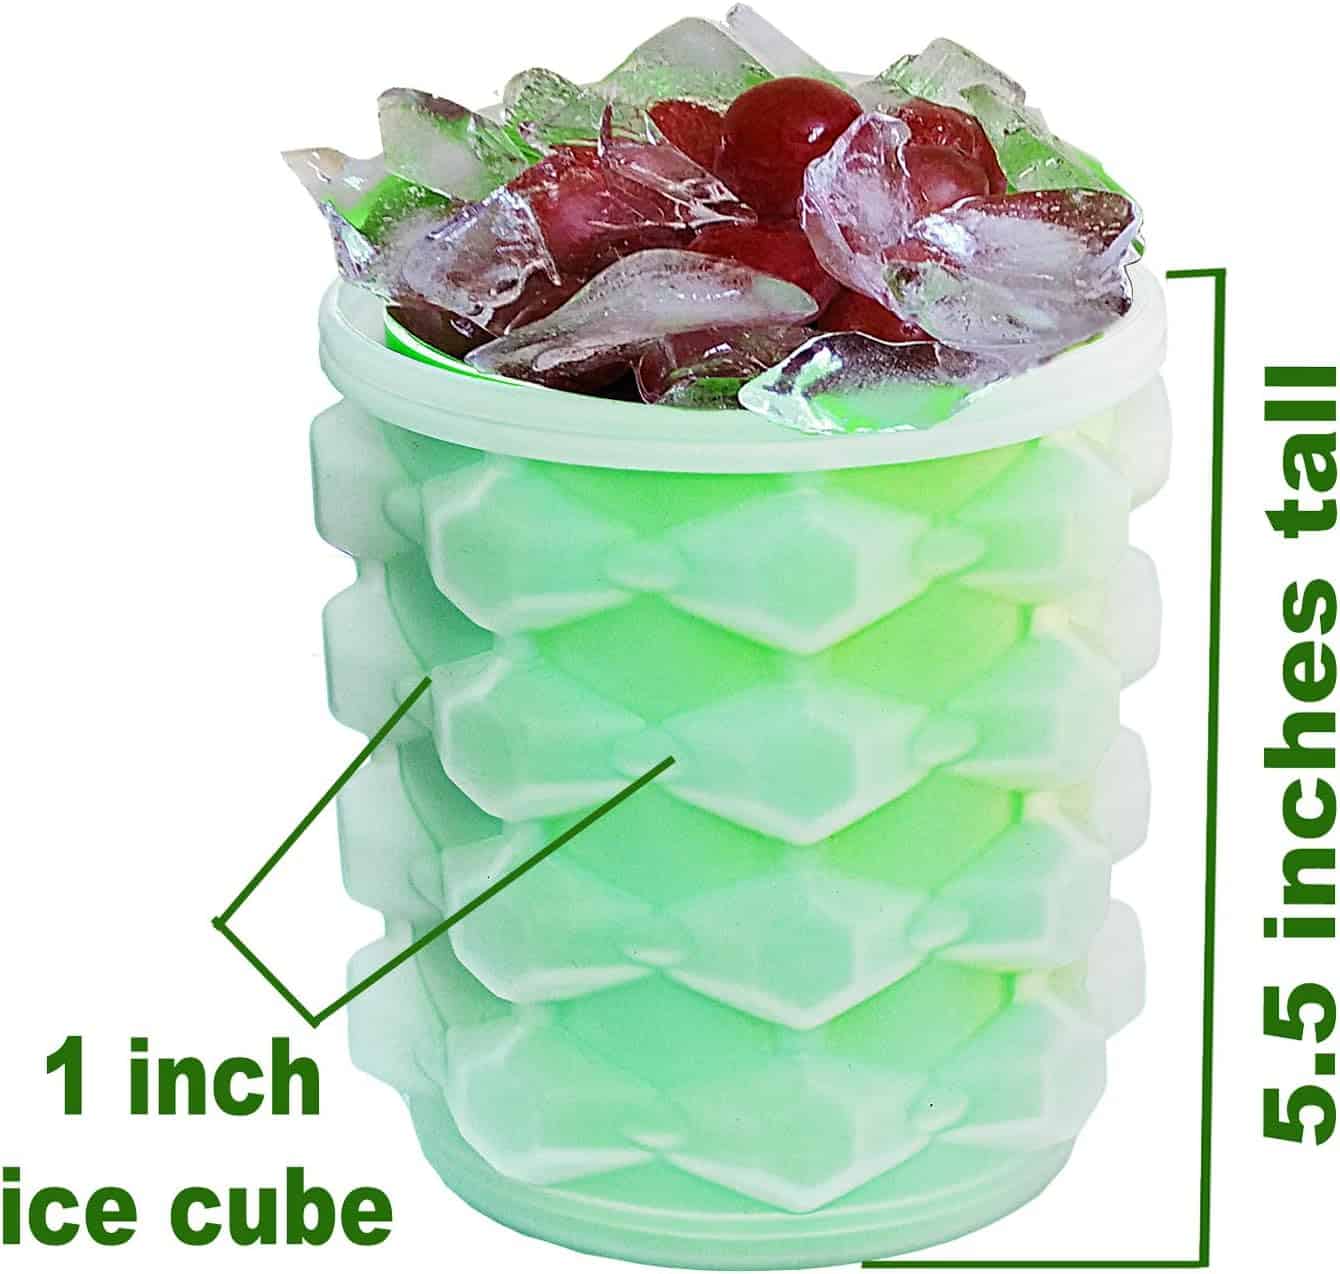 New Ice Cube Maker Silicone Bucket Mold Cooler With Lid Indoors Outdoors Use Makes Small Nugget Ice Chips for Soft Drinks Beverage Wine Beer Whiskey Cocktail Safe Healthy BPA Free Ice Tray Cylinder 4